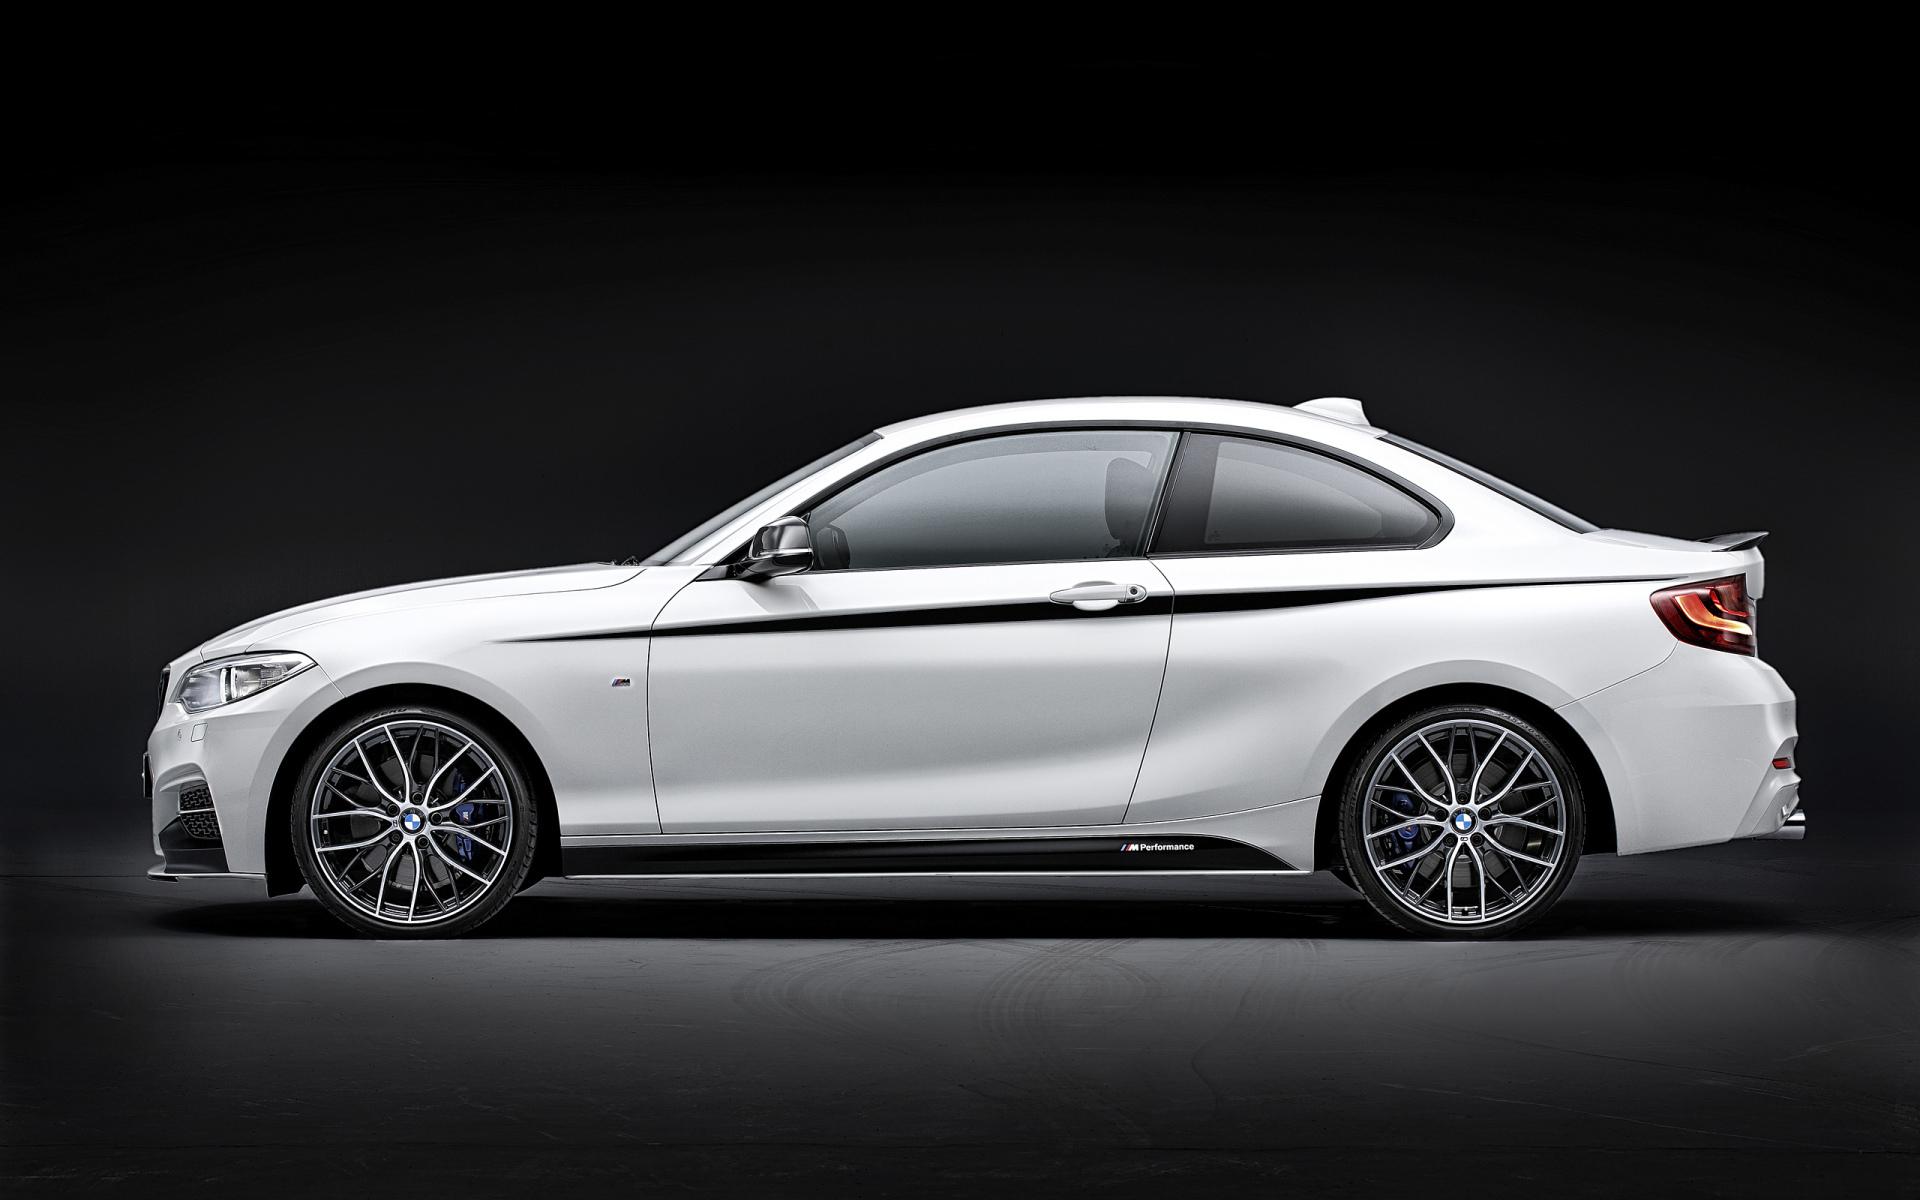 2014 BMW 2 Series Coupe wallpapers HD quality